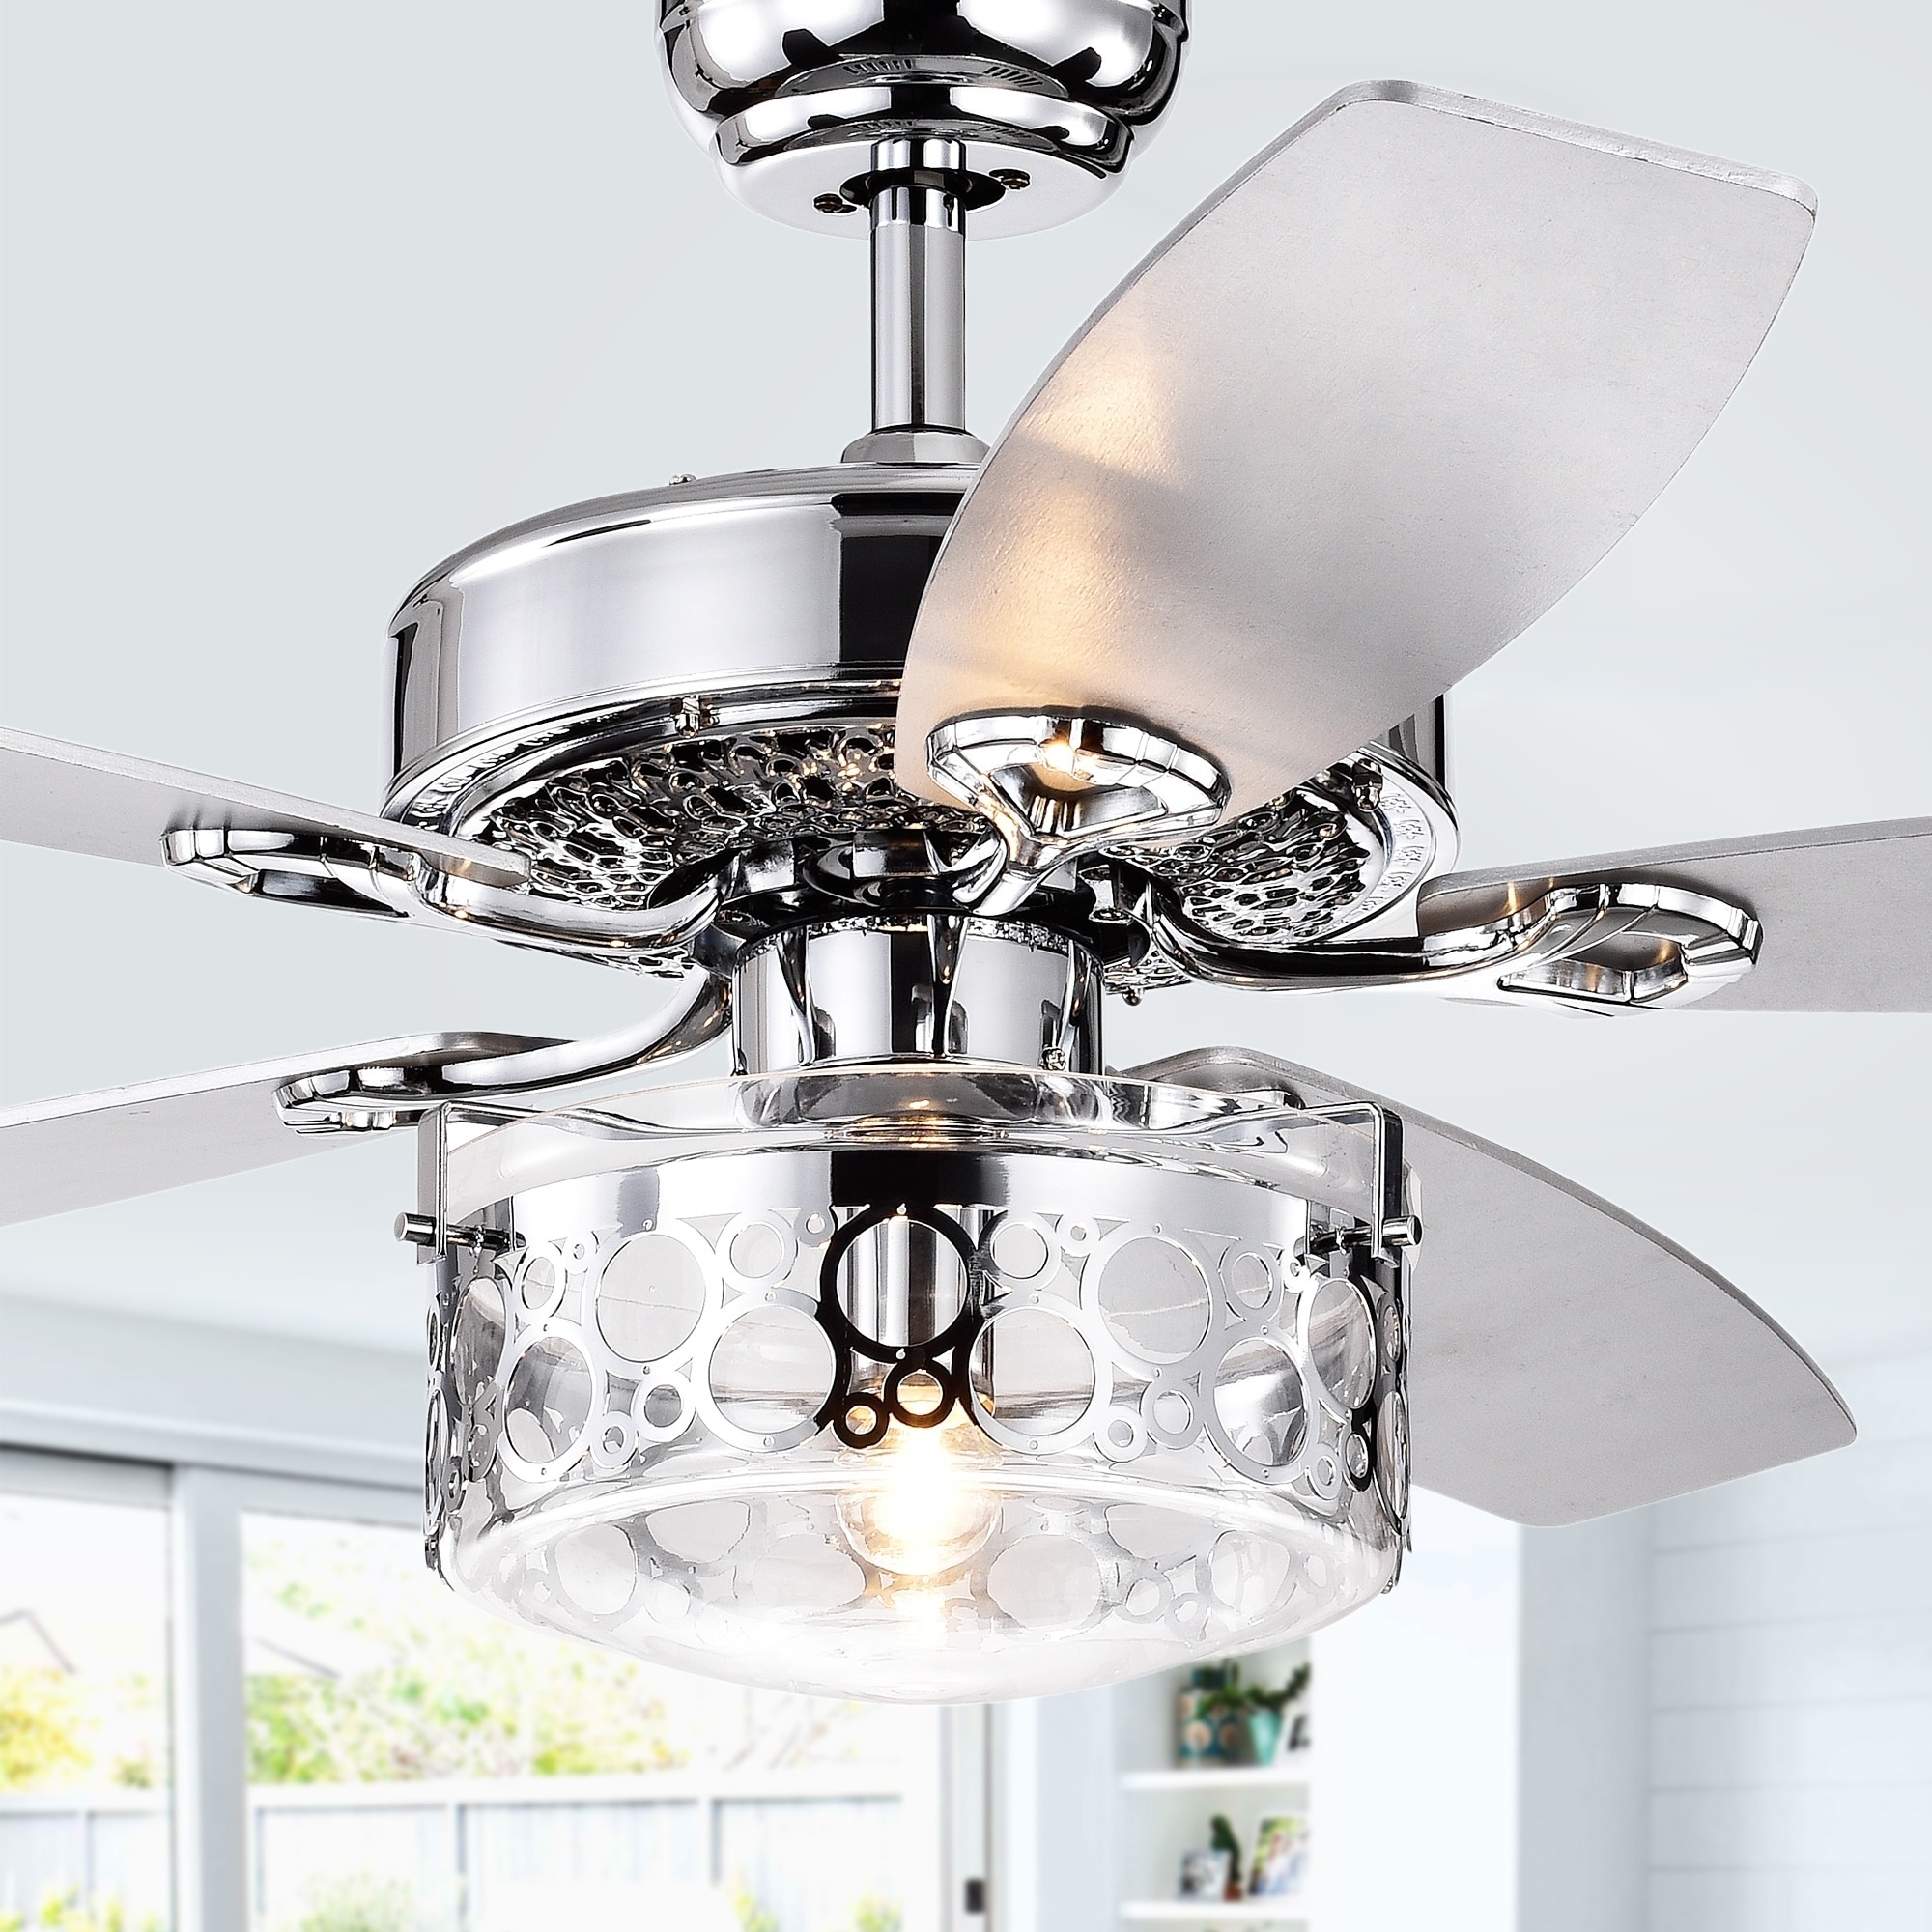 Shop Pamerine 52 Inch Chrome Lighted Ceiling Fan With Clear Glass